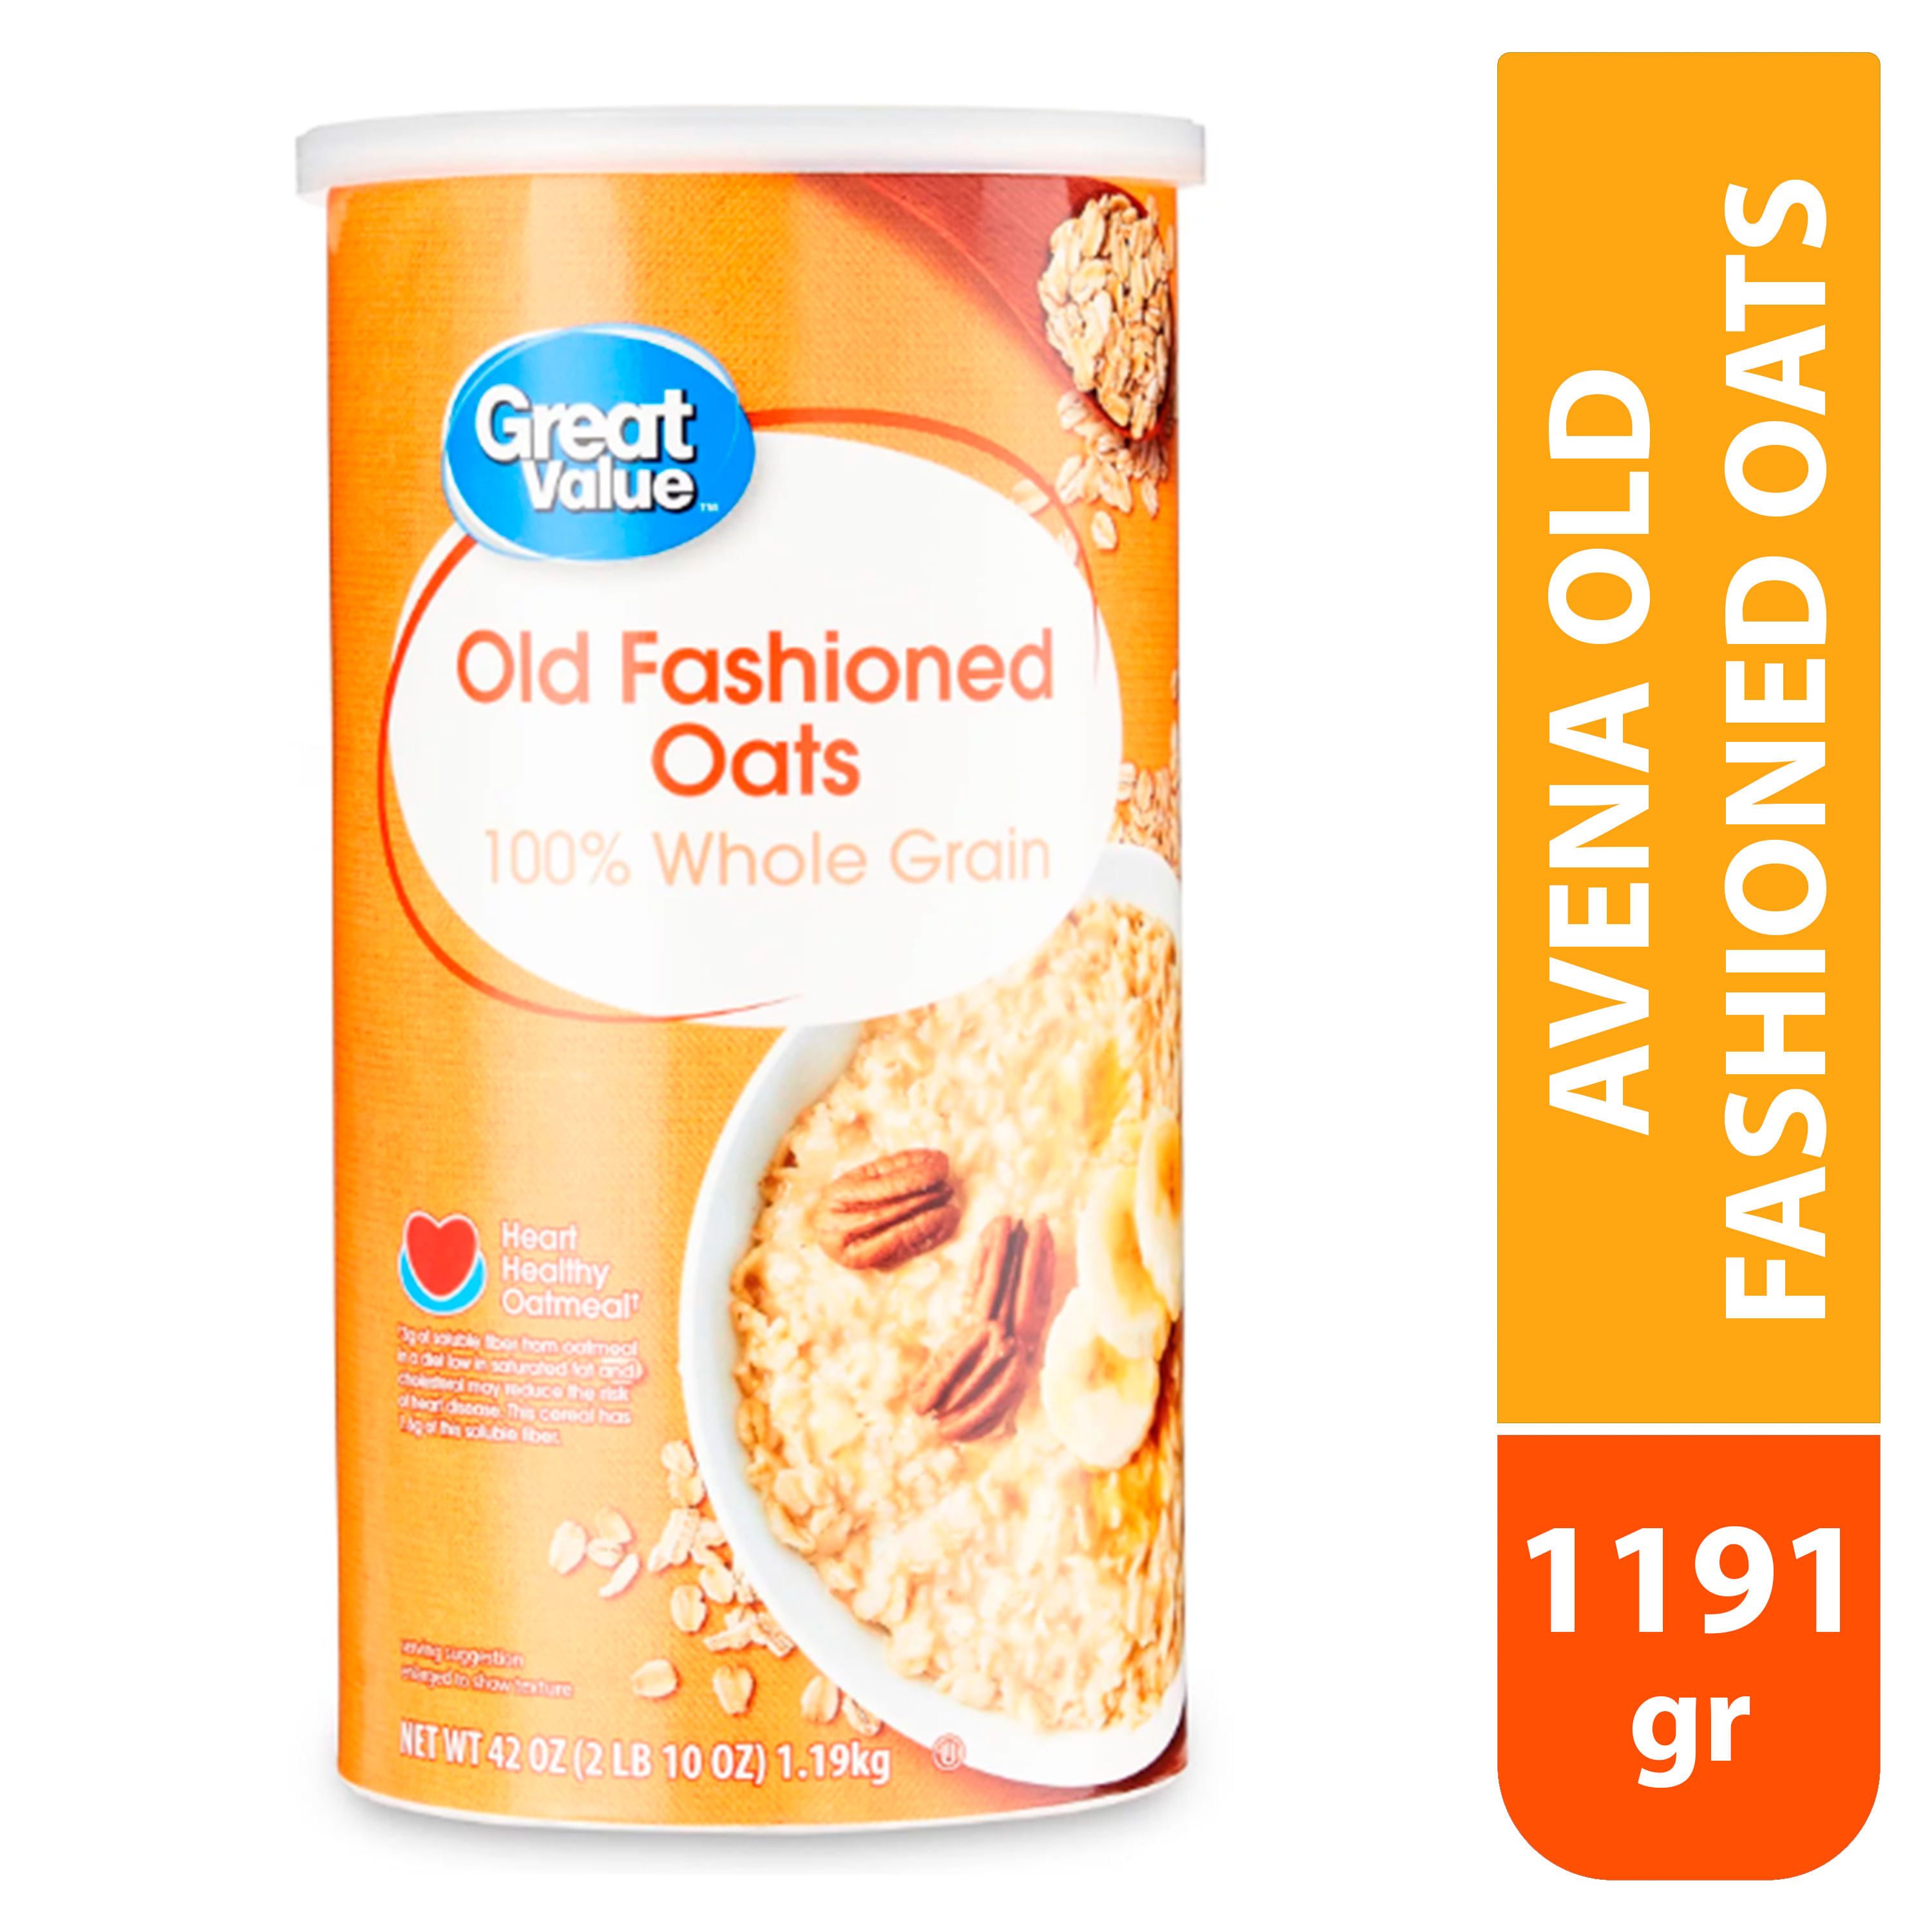 Avena-Great-Value-Old-Fashioned-Oats-1191g-1-59683